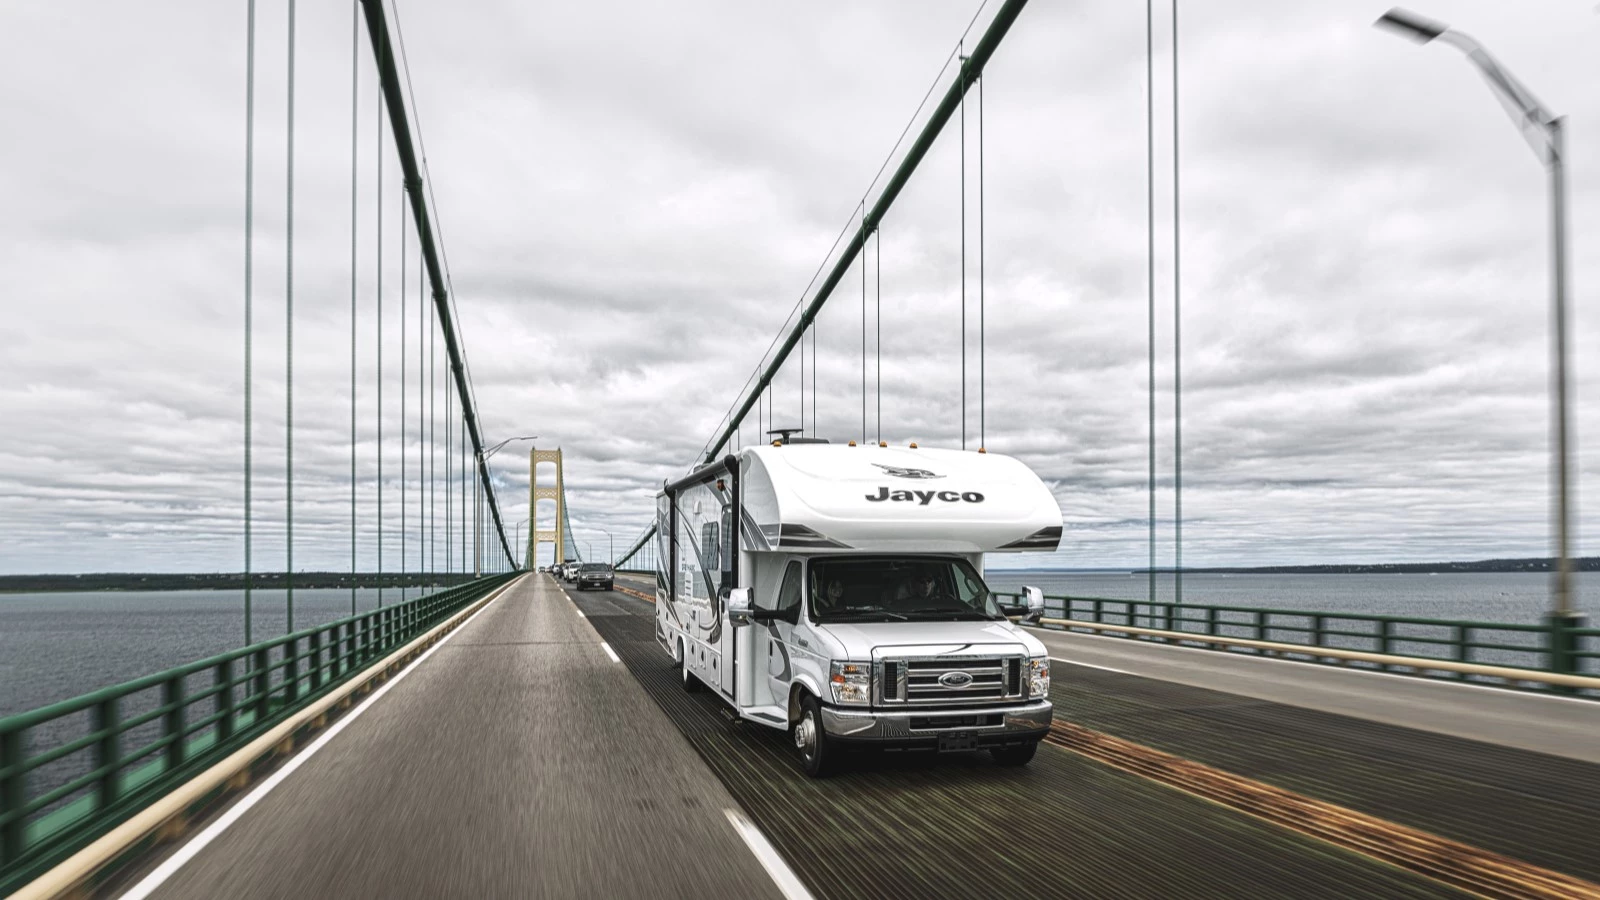 three quarter front view of a Jayco motorhome crossing a bridge